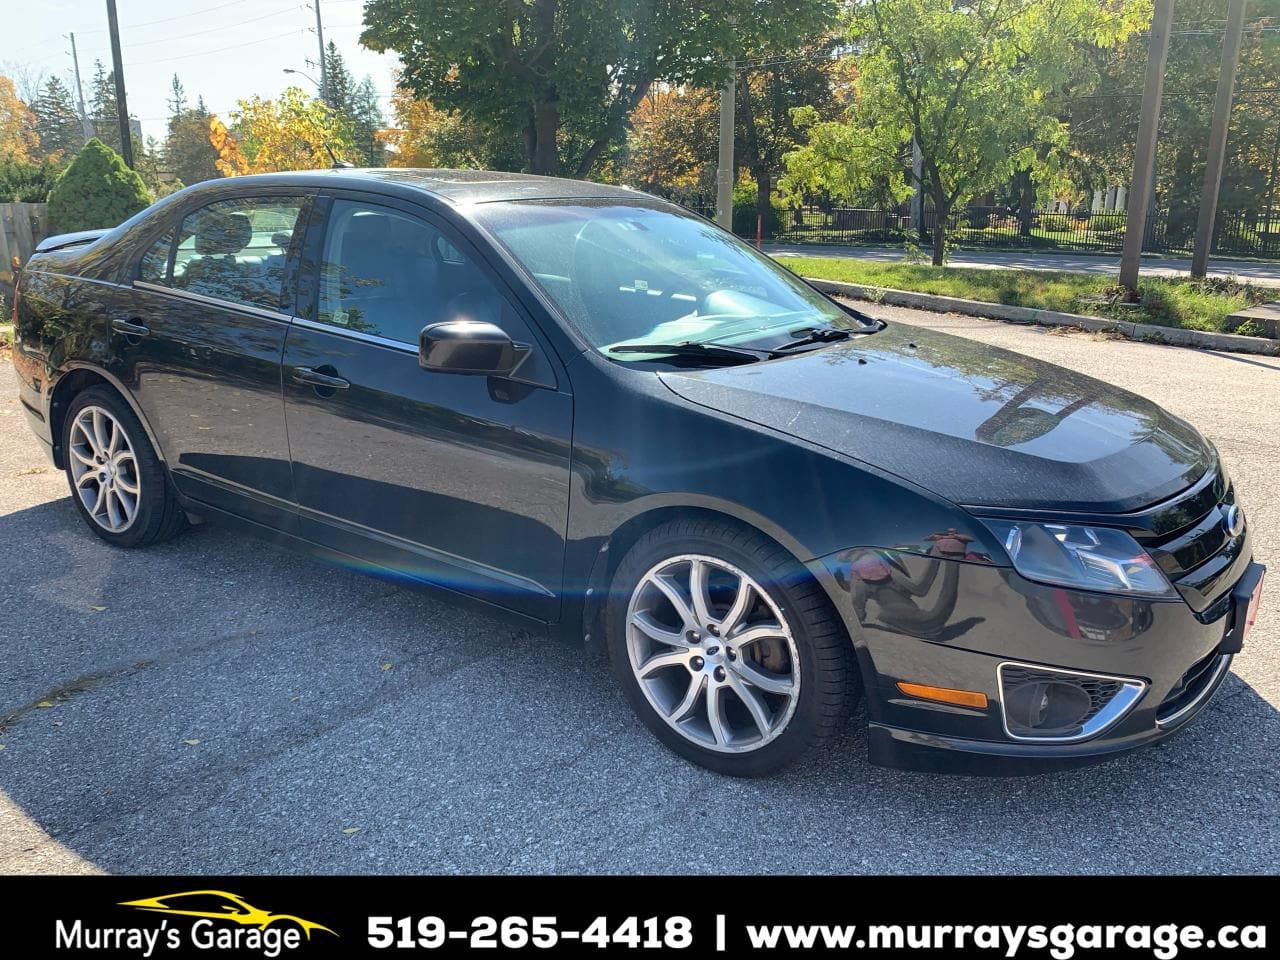 Murray's Garage & Auto Sales - Guelph, CA, cars for sale